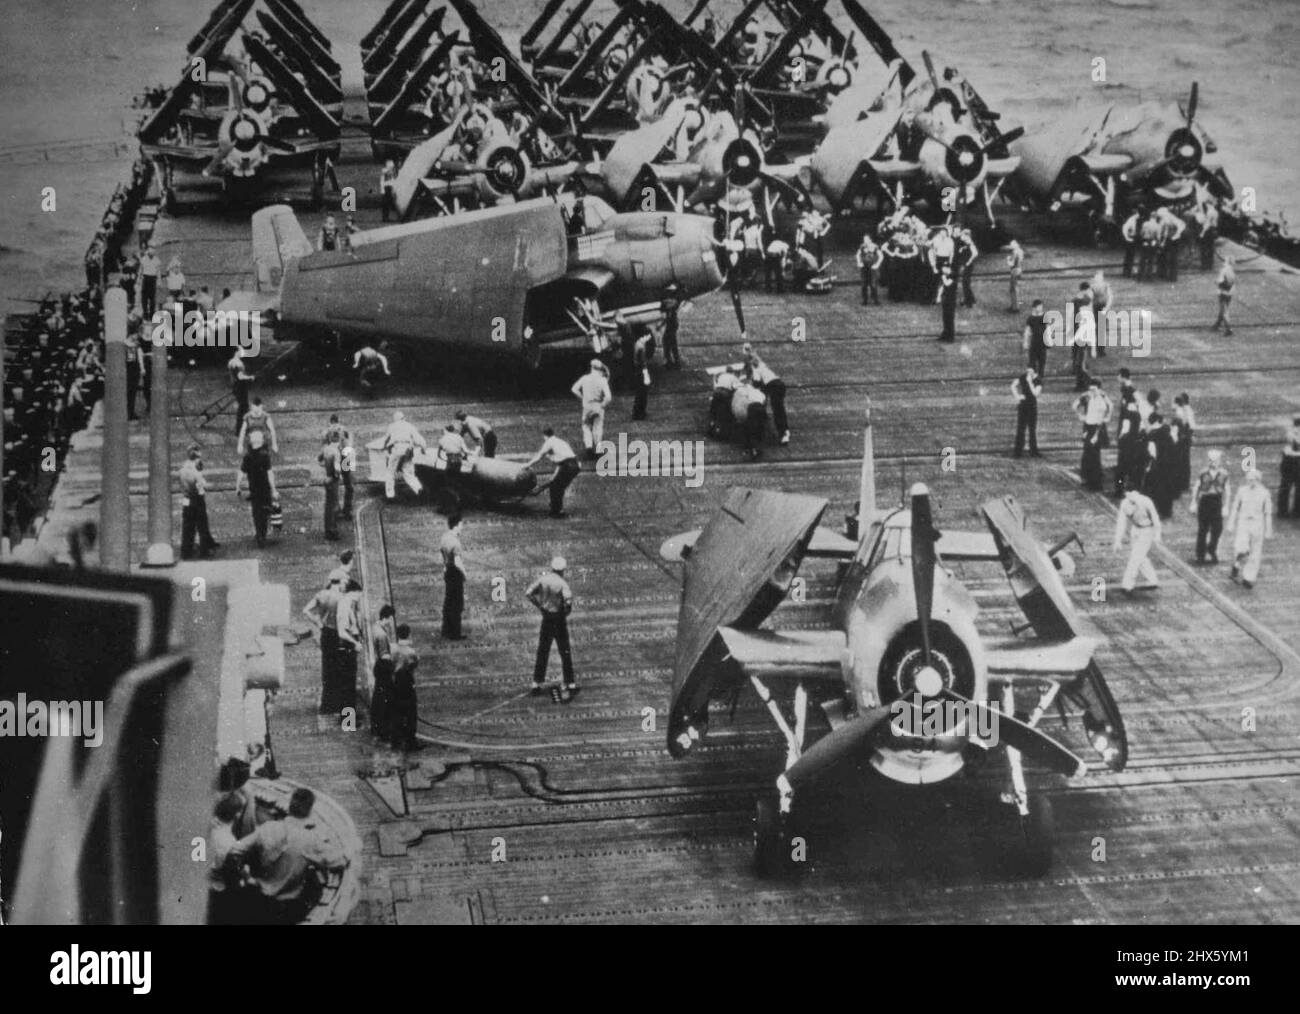 Loading U.S. Torpedo Bombers For Strike Against Japanese -- Torpedoes are loaded aboard an Avenger bomber, which is about to take off the flight deck of a U.S. Navy aircraft carrier for a strike against the Japanese in the Pacific. Other planes, part of the Navy's Carrier Air Group Two, stand ready on the deck with wings still folded to save space. Carriers like this one were part of the hard hitting American and Australian naval forces which, in dealt simultaneous battles late in October, 144, Stock Photo